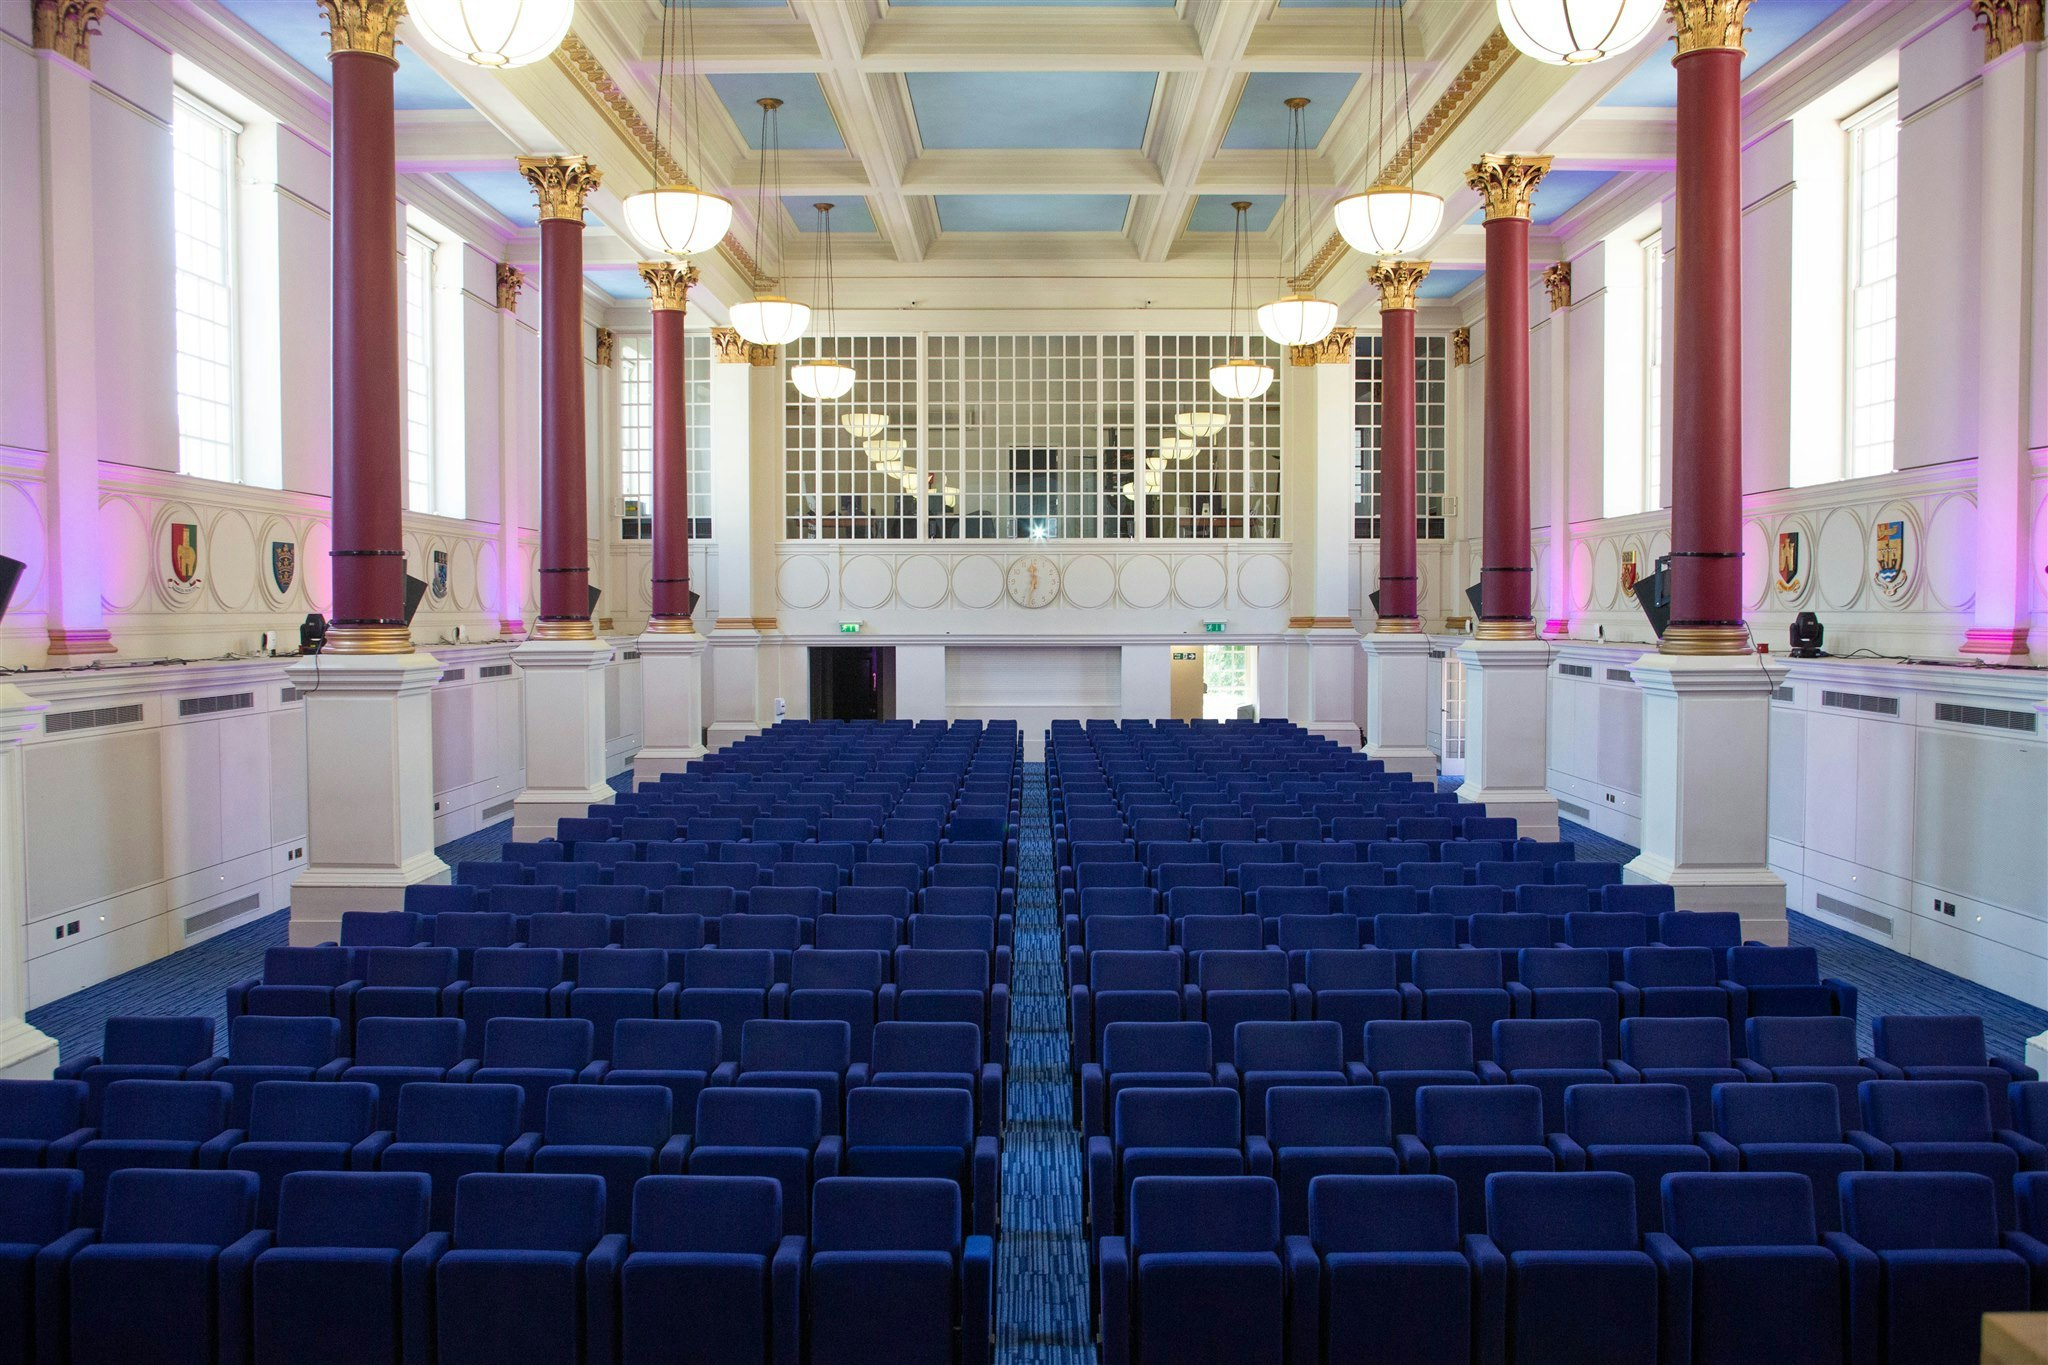 BMA House - Great Hall image 6